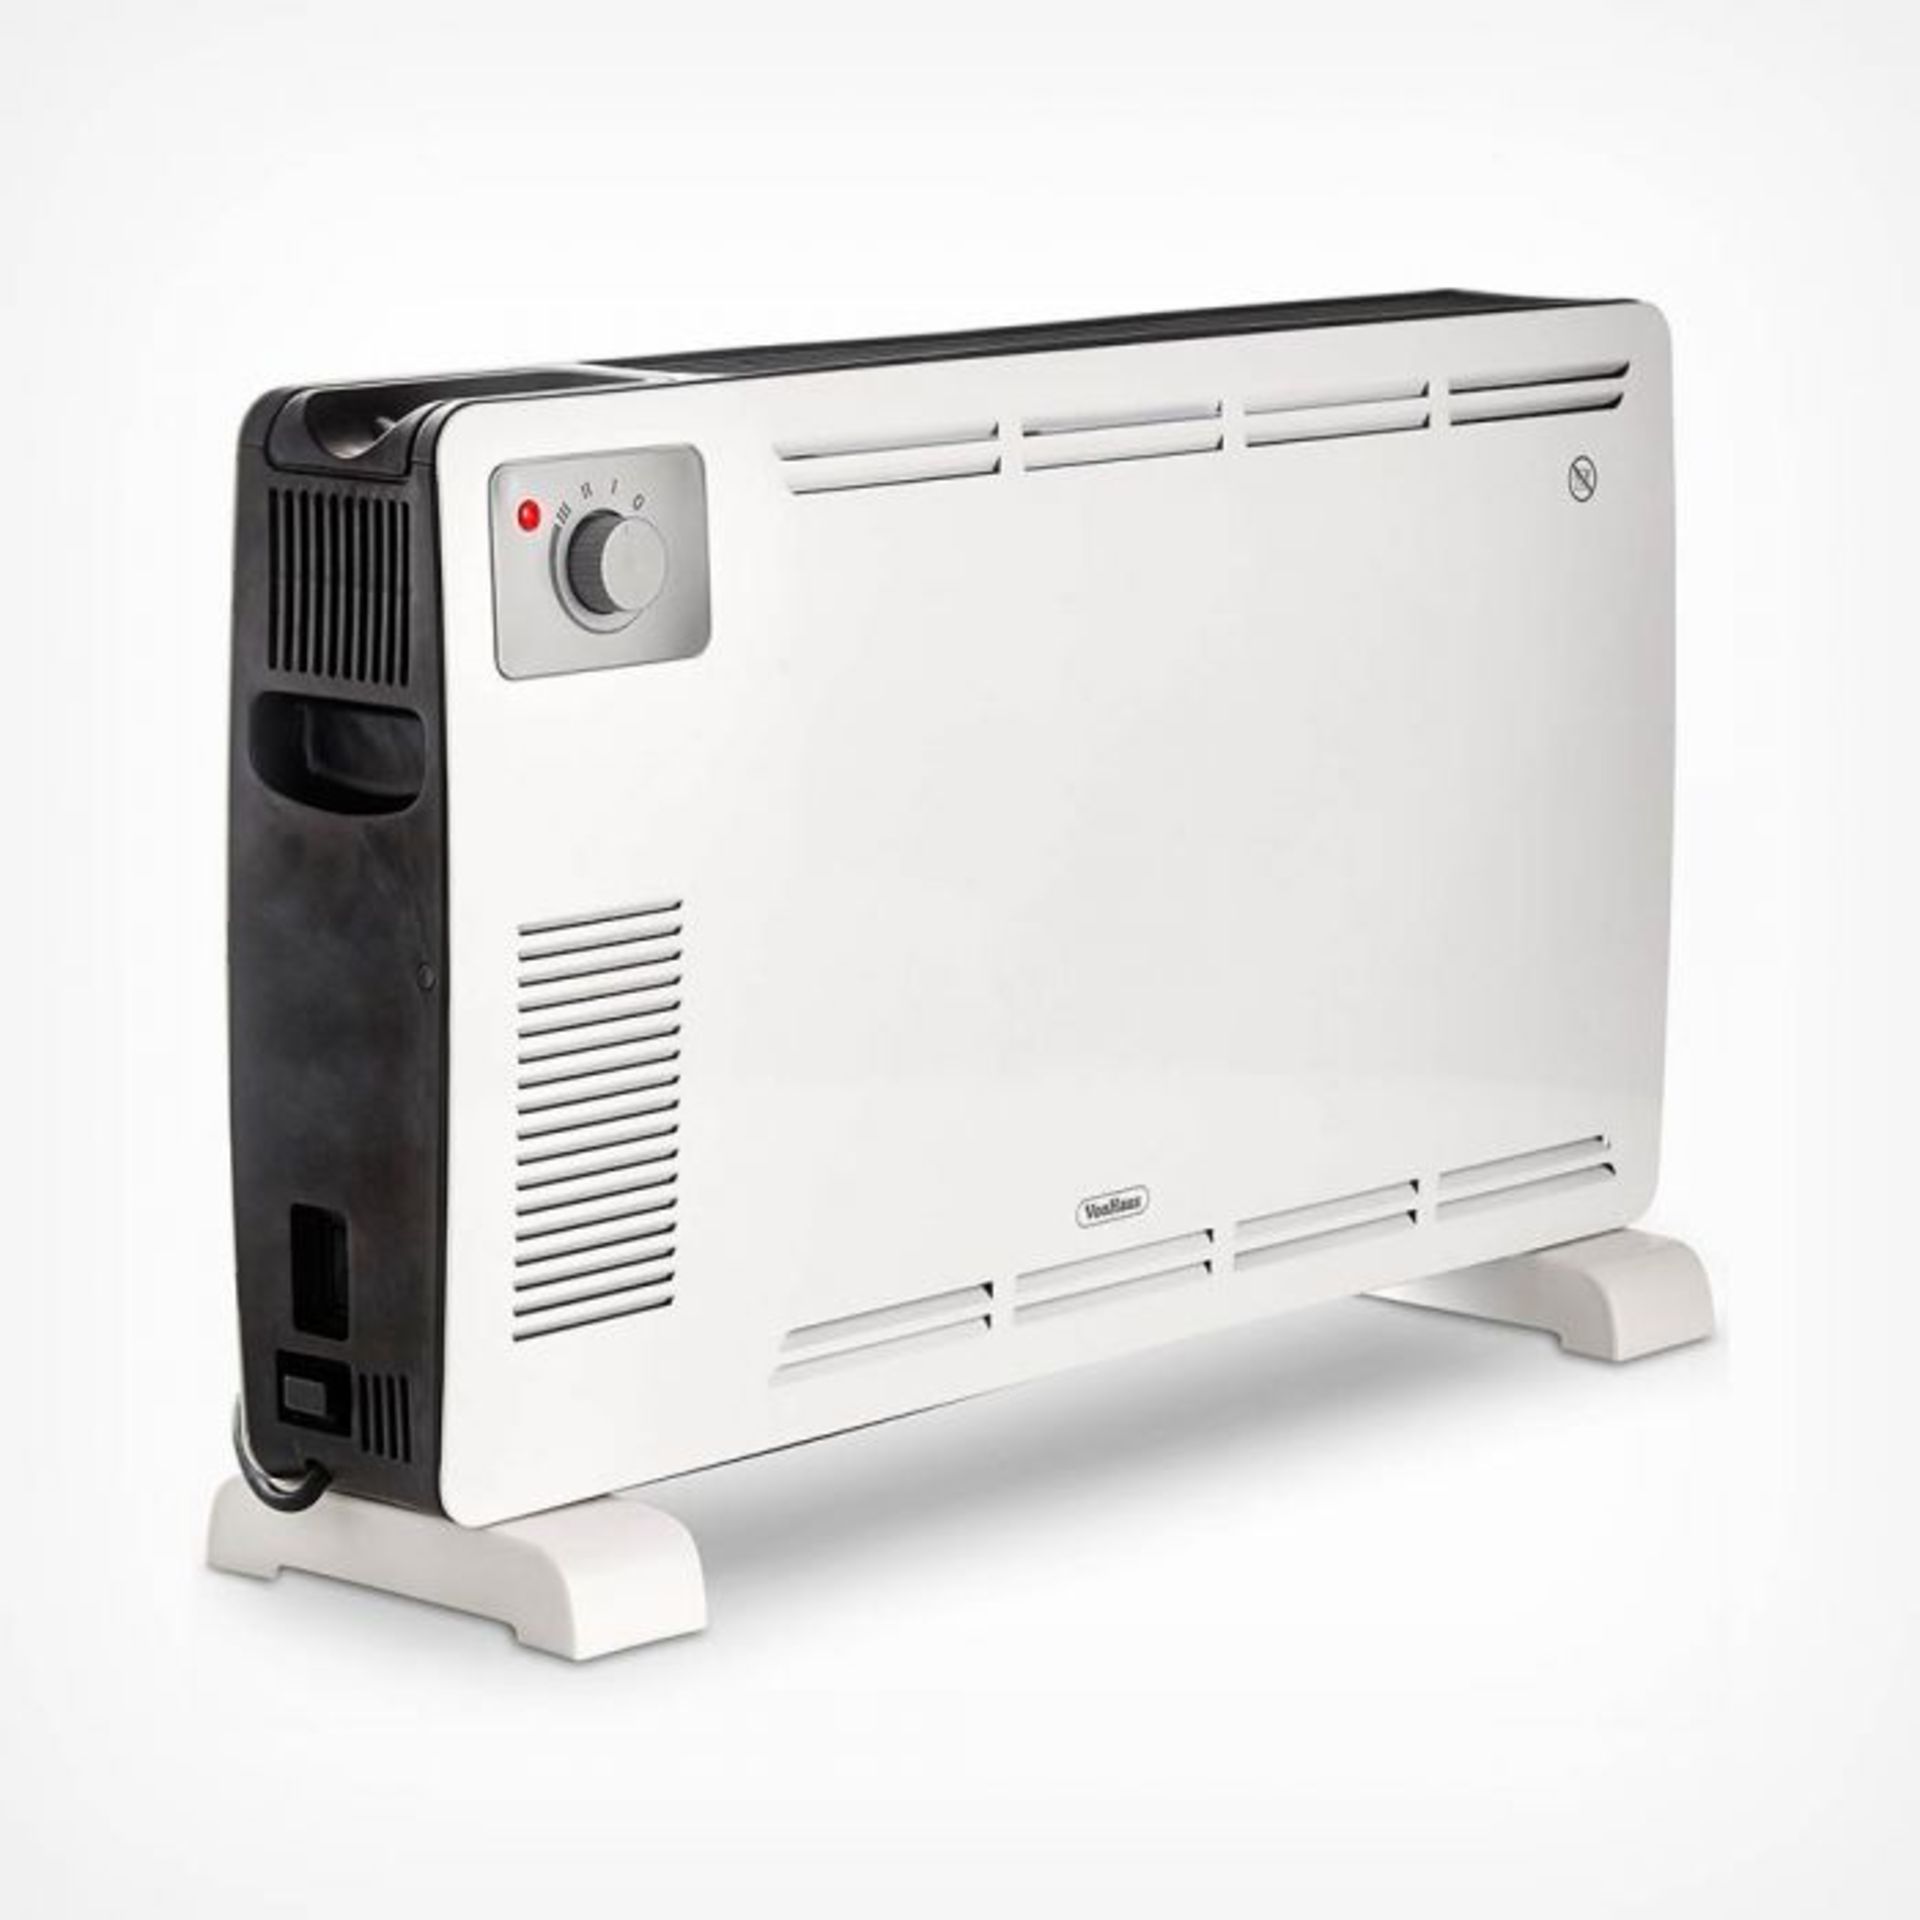 2200W Convector Heater - White. This convector heats up quickly thanks to convection technology.